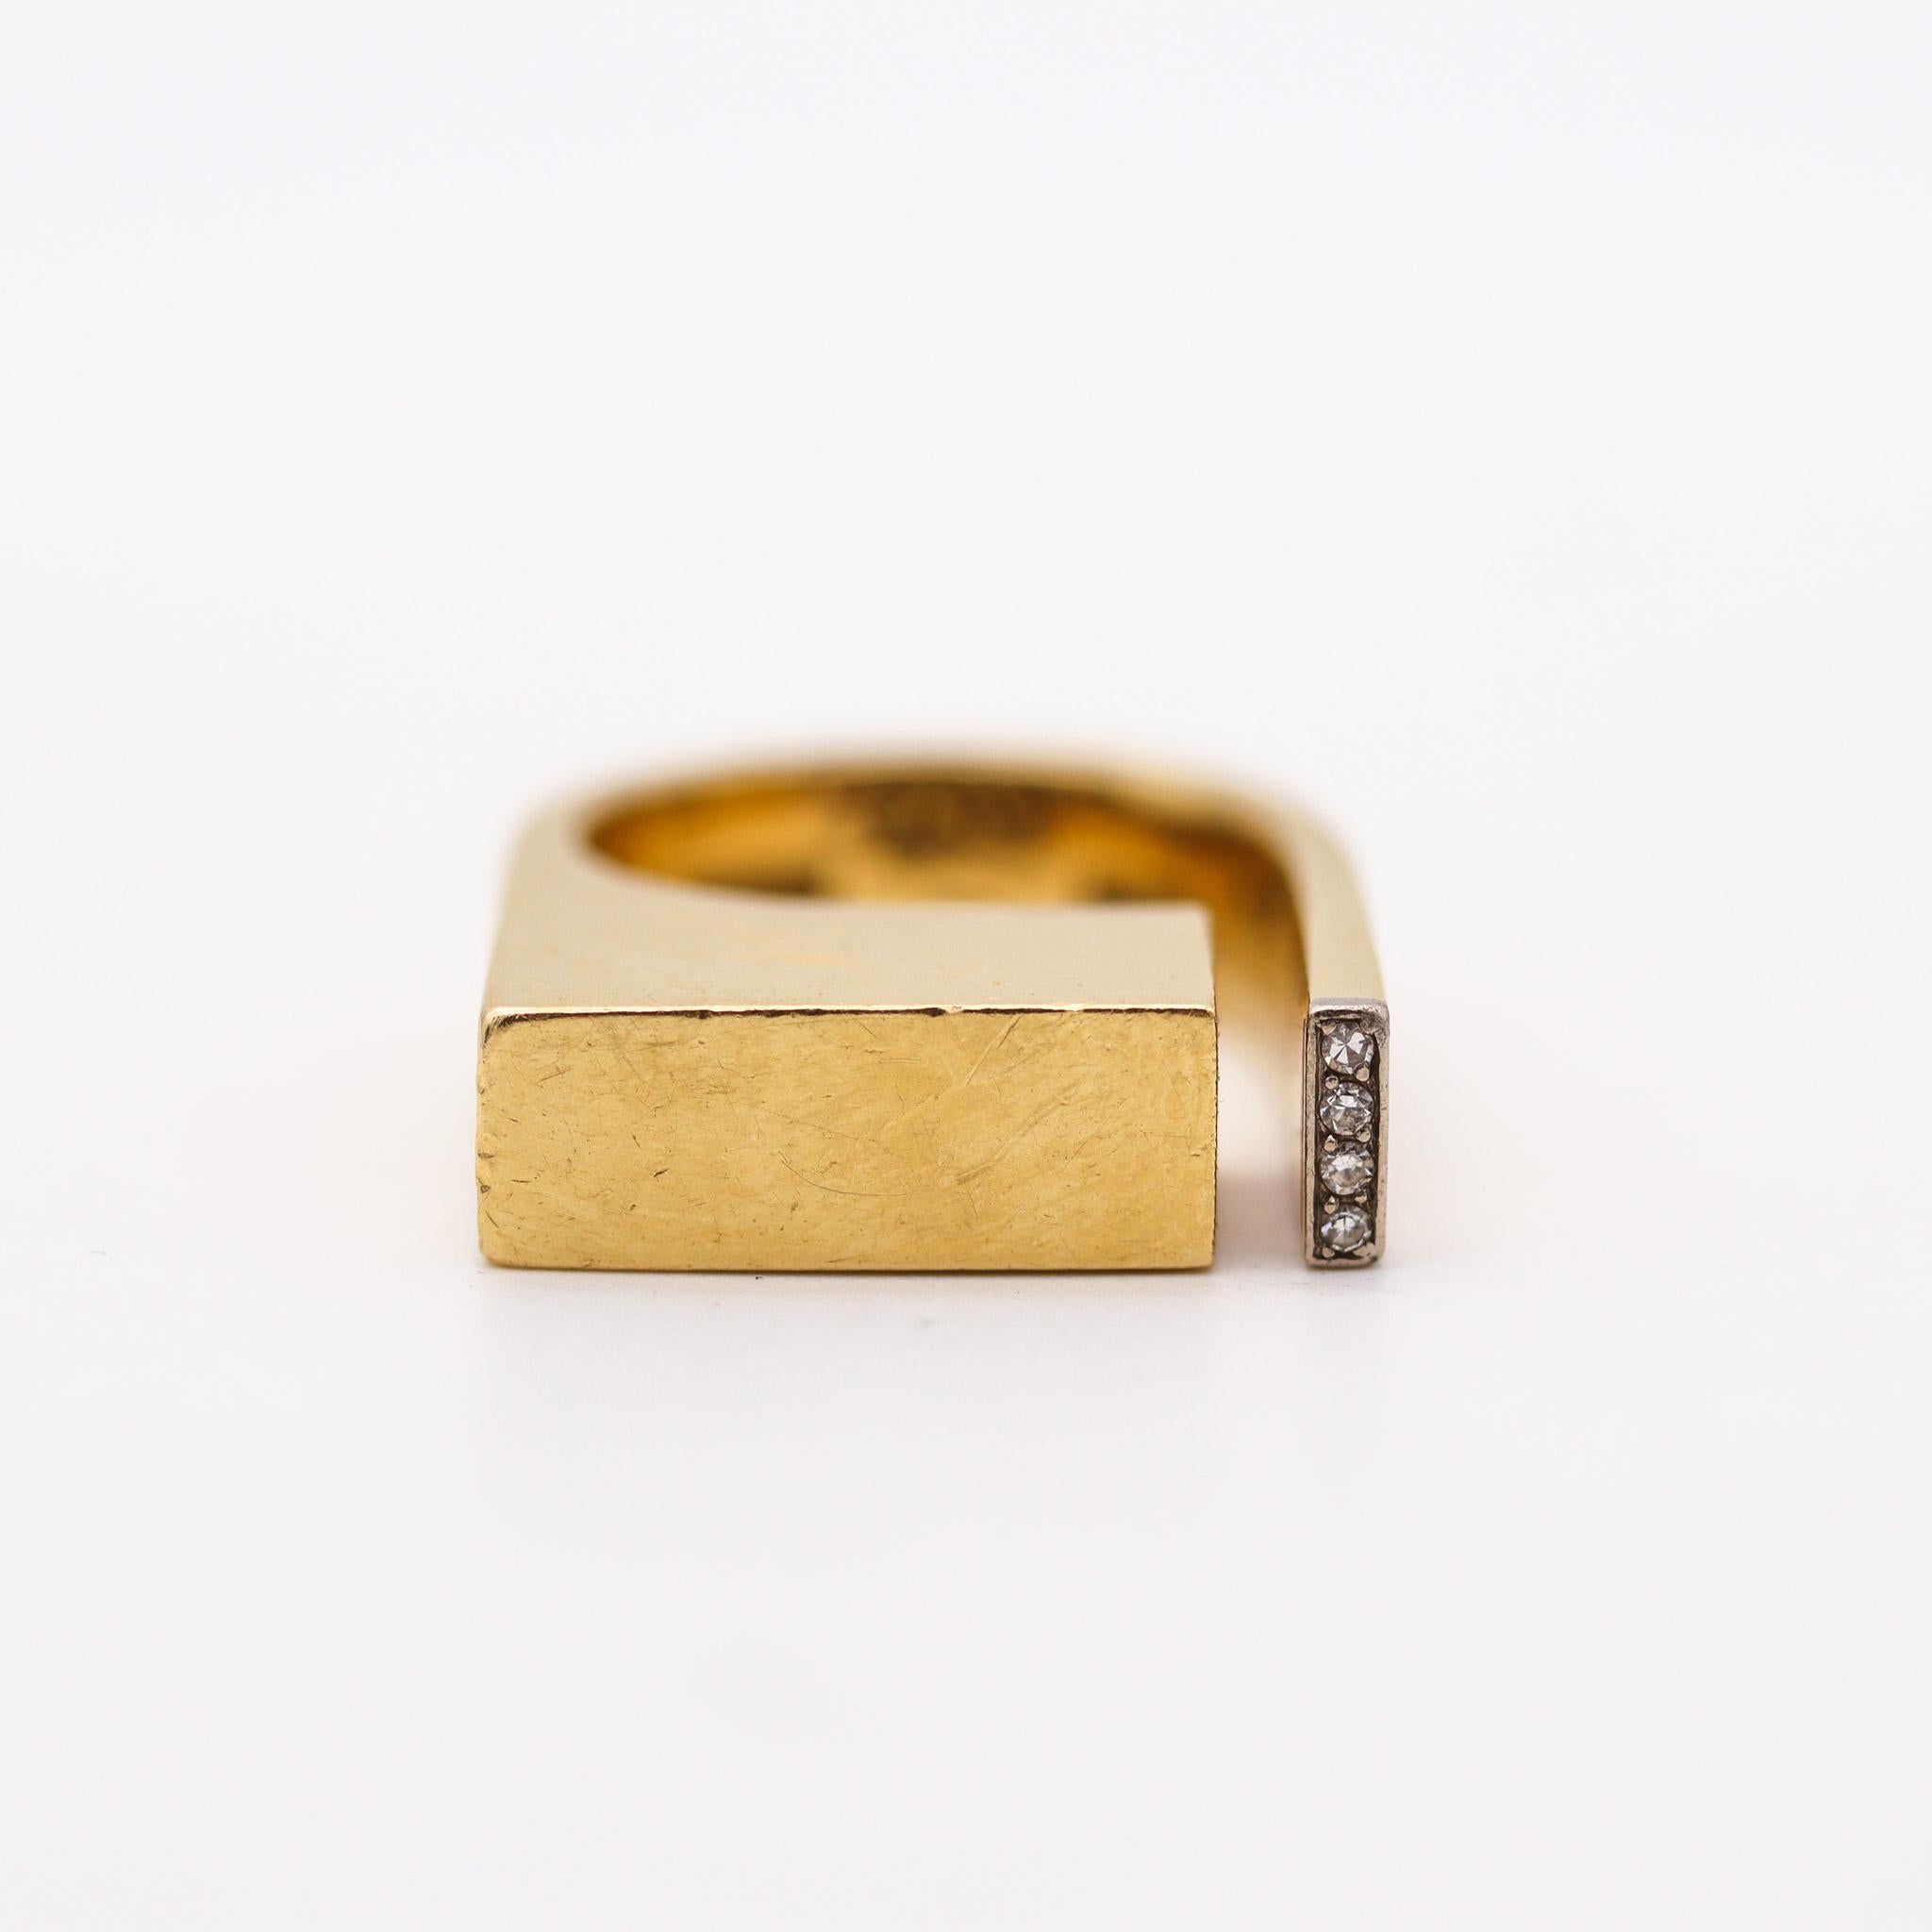 Modernist Rey Urban 1970 Denmark Geometric Sculptural Ring in Solid 18K Gold And Diamonds For Sale